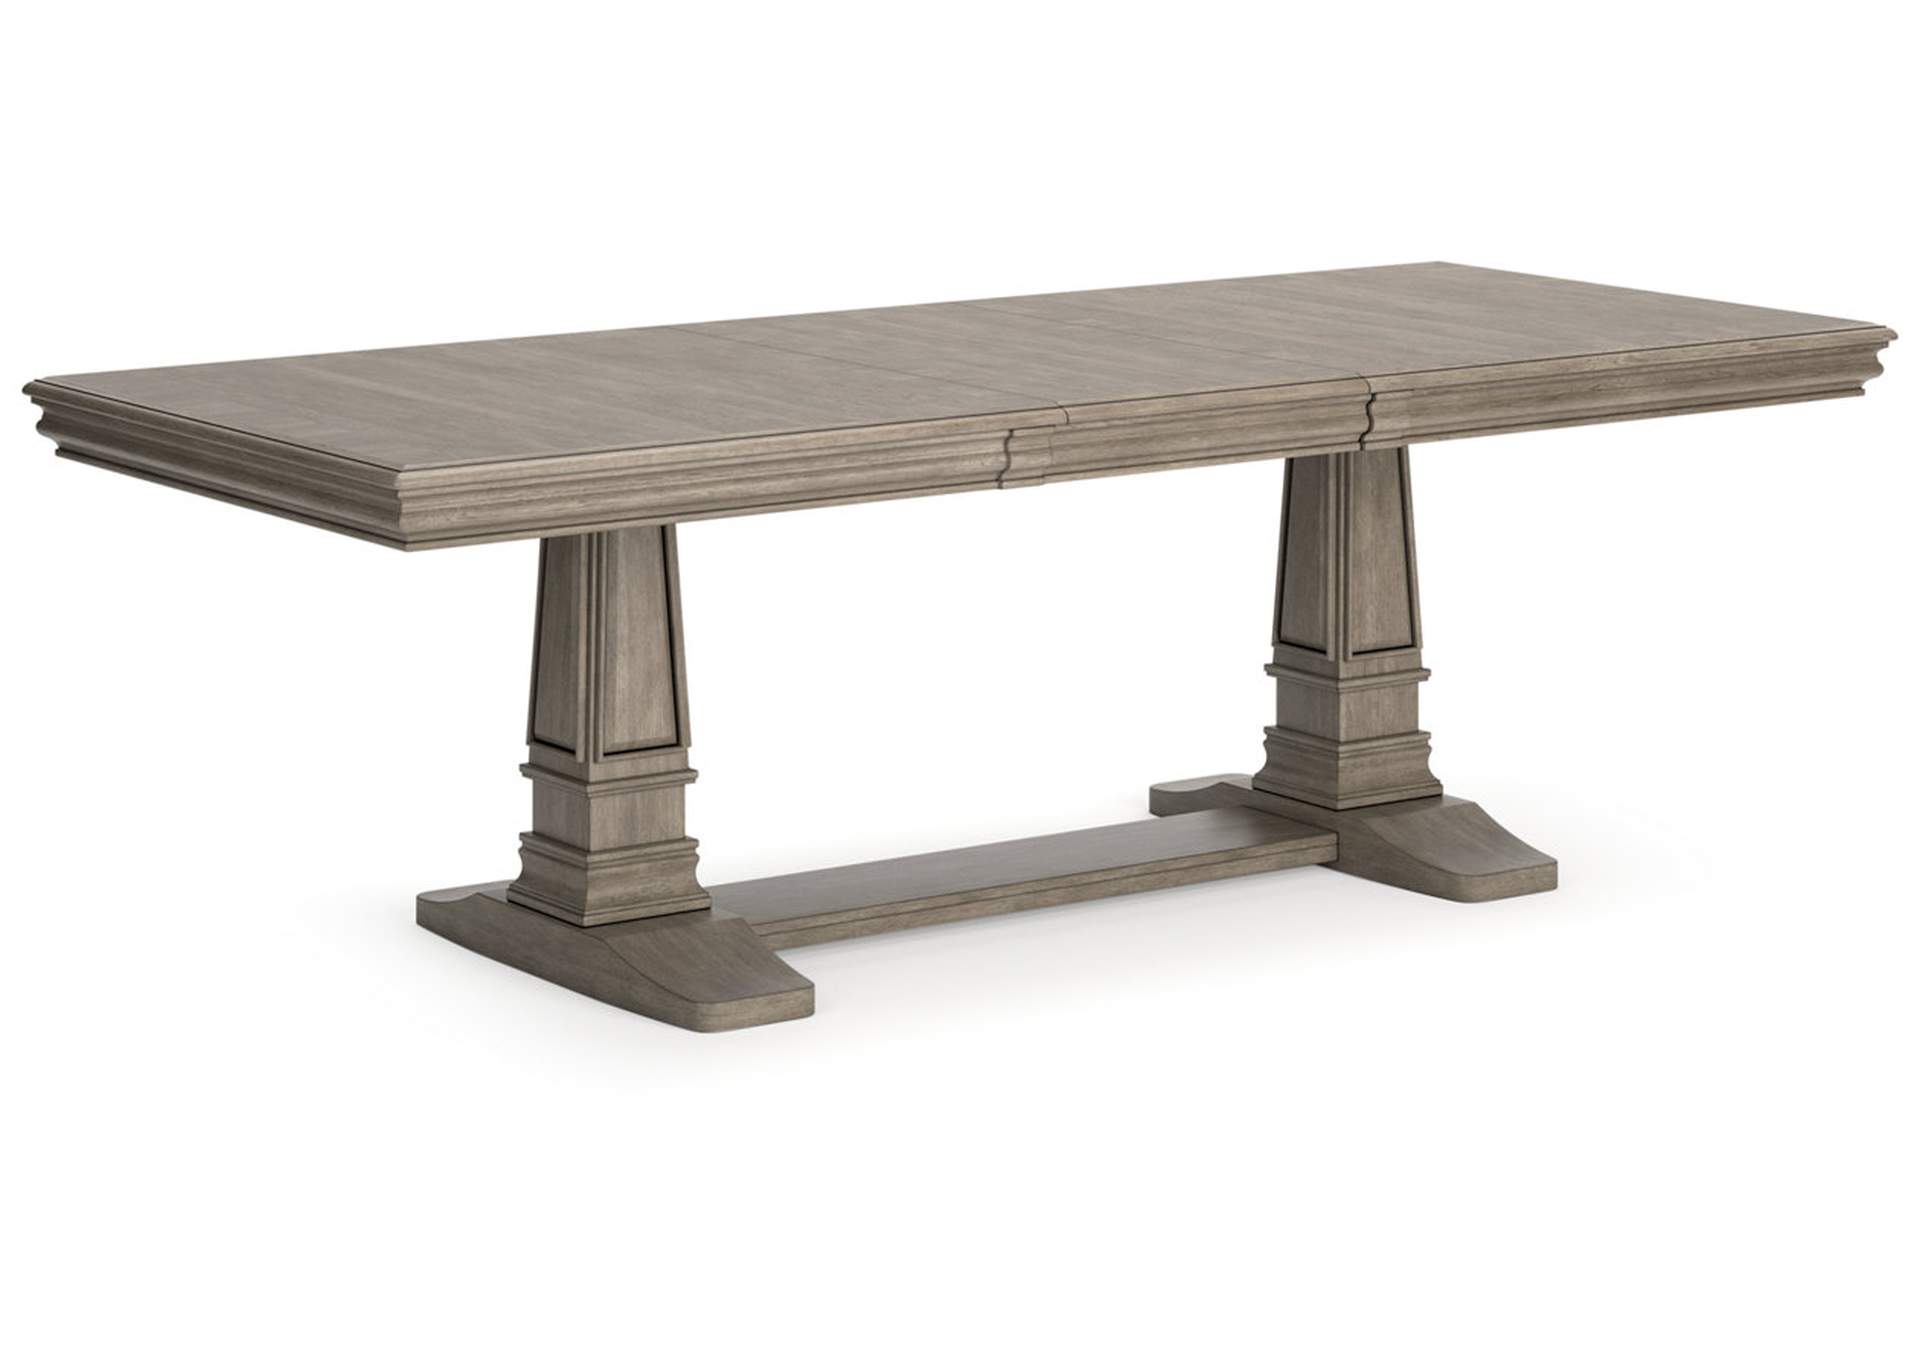 Lexorne Dining Extension Table Ivan Smith Furniture